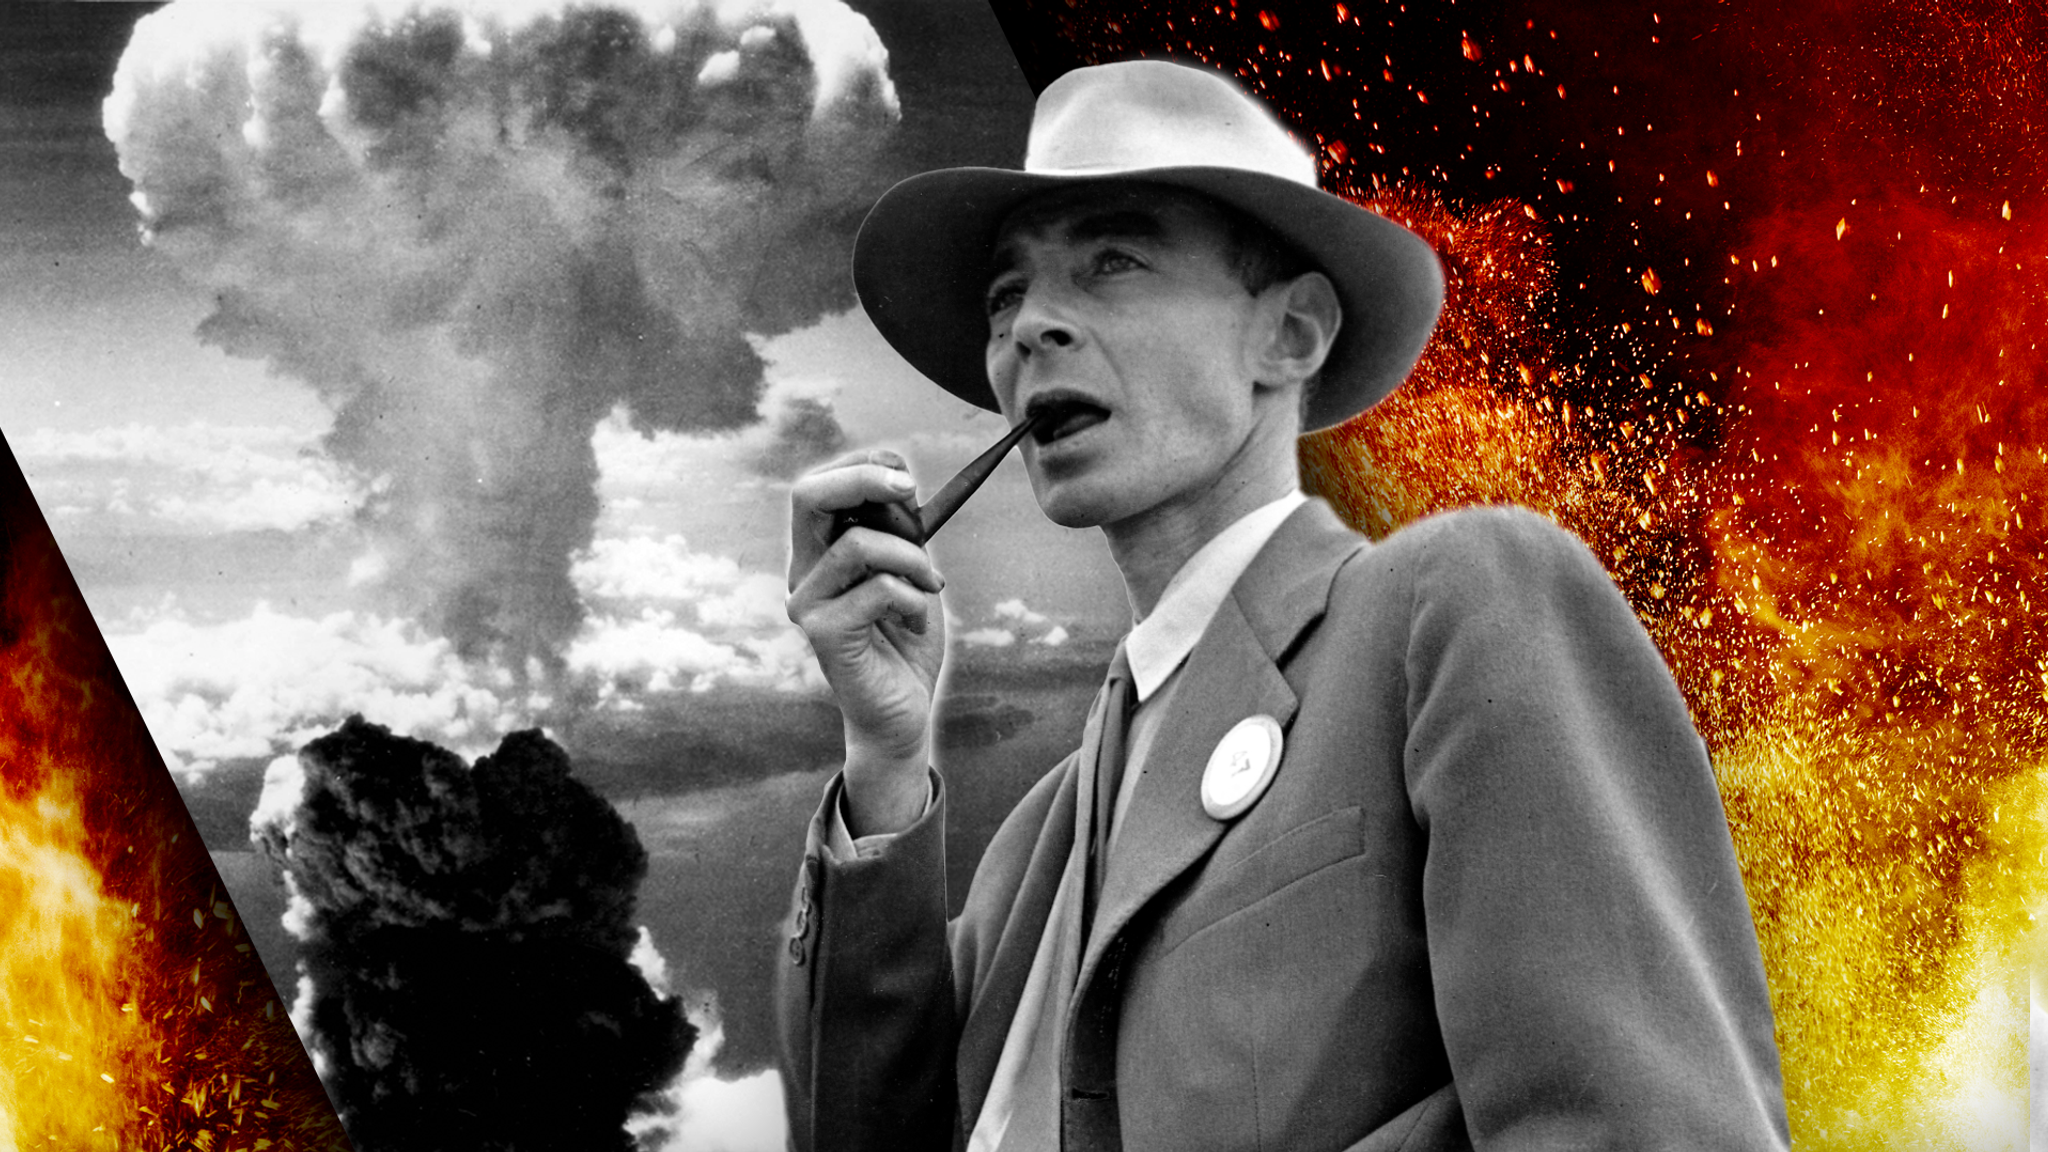 Oppenheimer: The 'destroyer of worlds' who built the atomic bomb - and how his legacy still impacts us today | Science & Tech News | Sky News